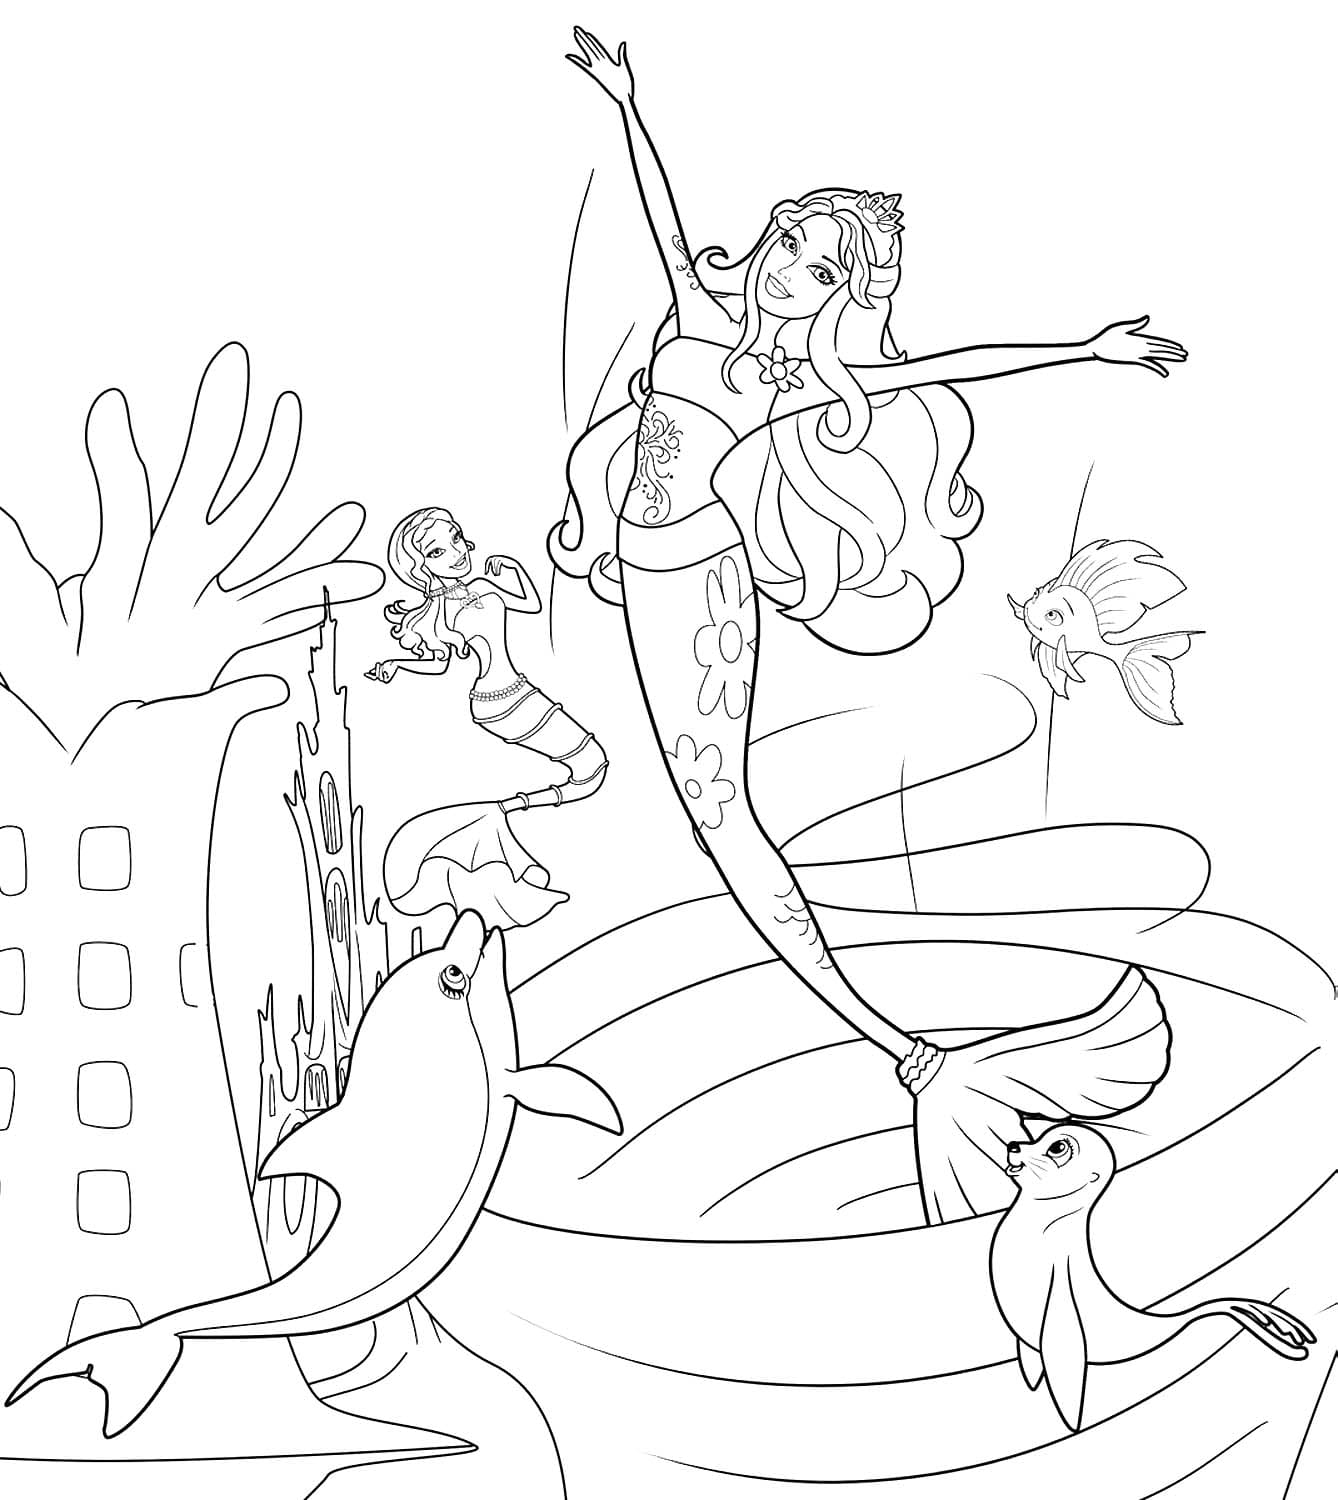 Coloring page Barbie Mermaid Sea world with barbie dolls